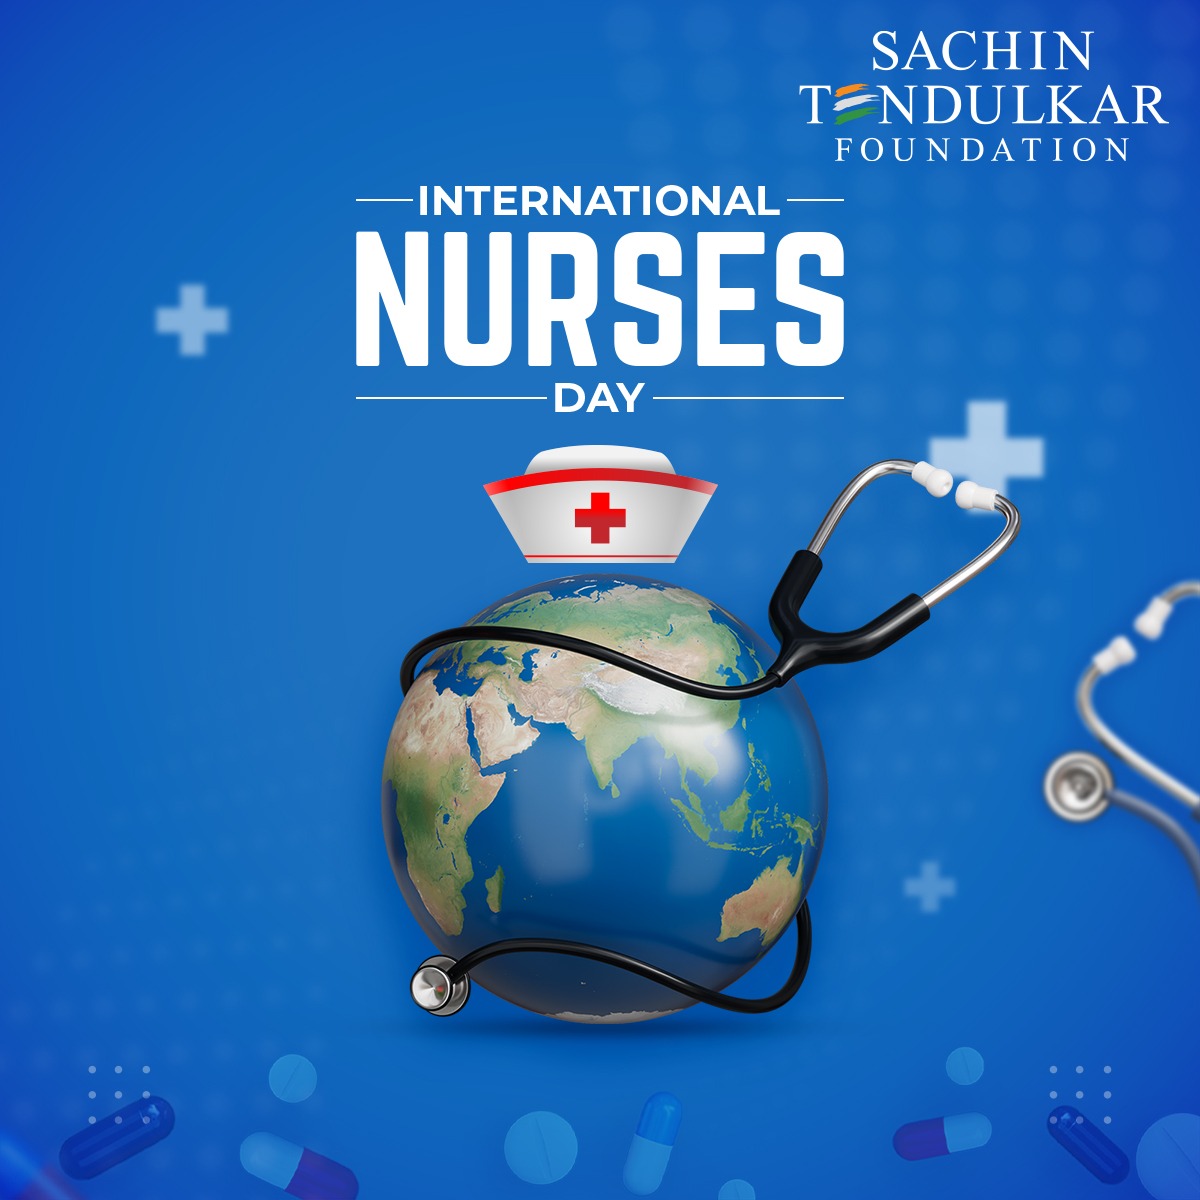 On #InternationalNursesDay, we express our sincere gratitude to all the nurses who ensure patient safety and care. At #STF, we recognize healthcare as an important pillar for children and understand the significance of nurses. We are thankful for their compassion and dedication.